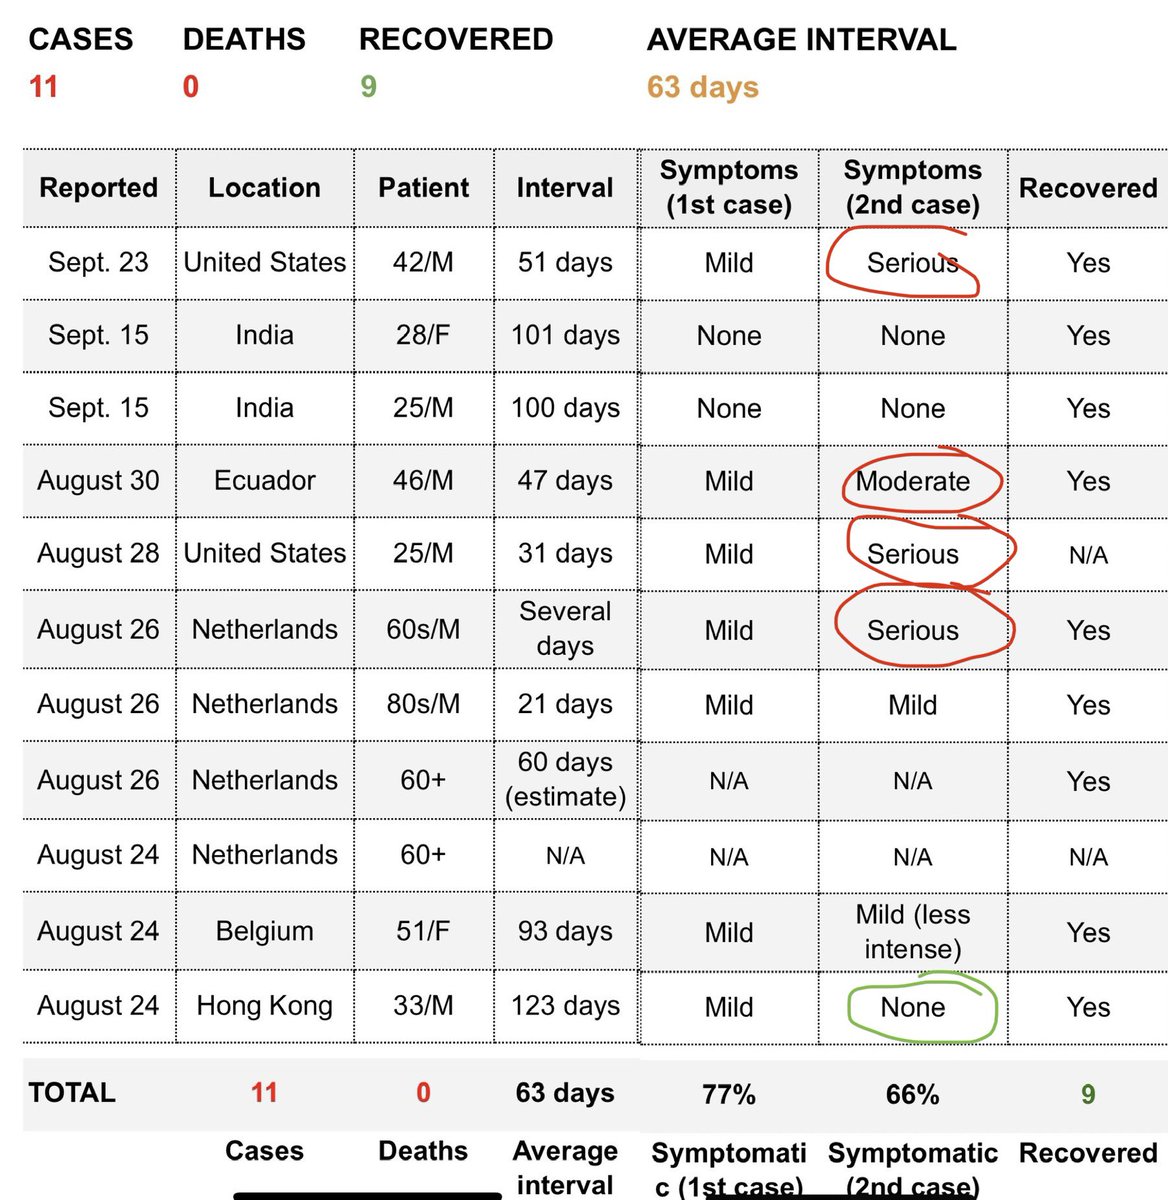 RE-INFECTION TRACKER—now 11: There has now been 11 documented cases of  #SARSCoV2 infection.  @BNONews has been tracking such clinical reinfections of  #COVID19. By BNO unofficial tabulation, there are now 11, 4 of which suffered more severe 2nd infection.   https://bnonews.com/index.php/2020/08/covid-19-reinfection-tracker/